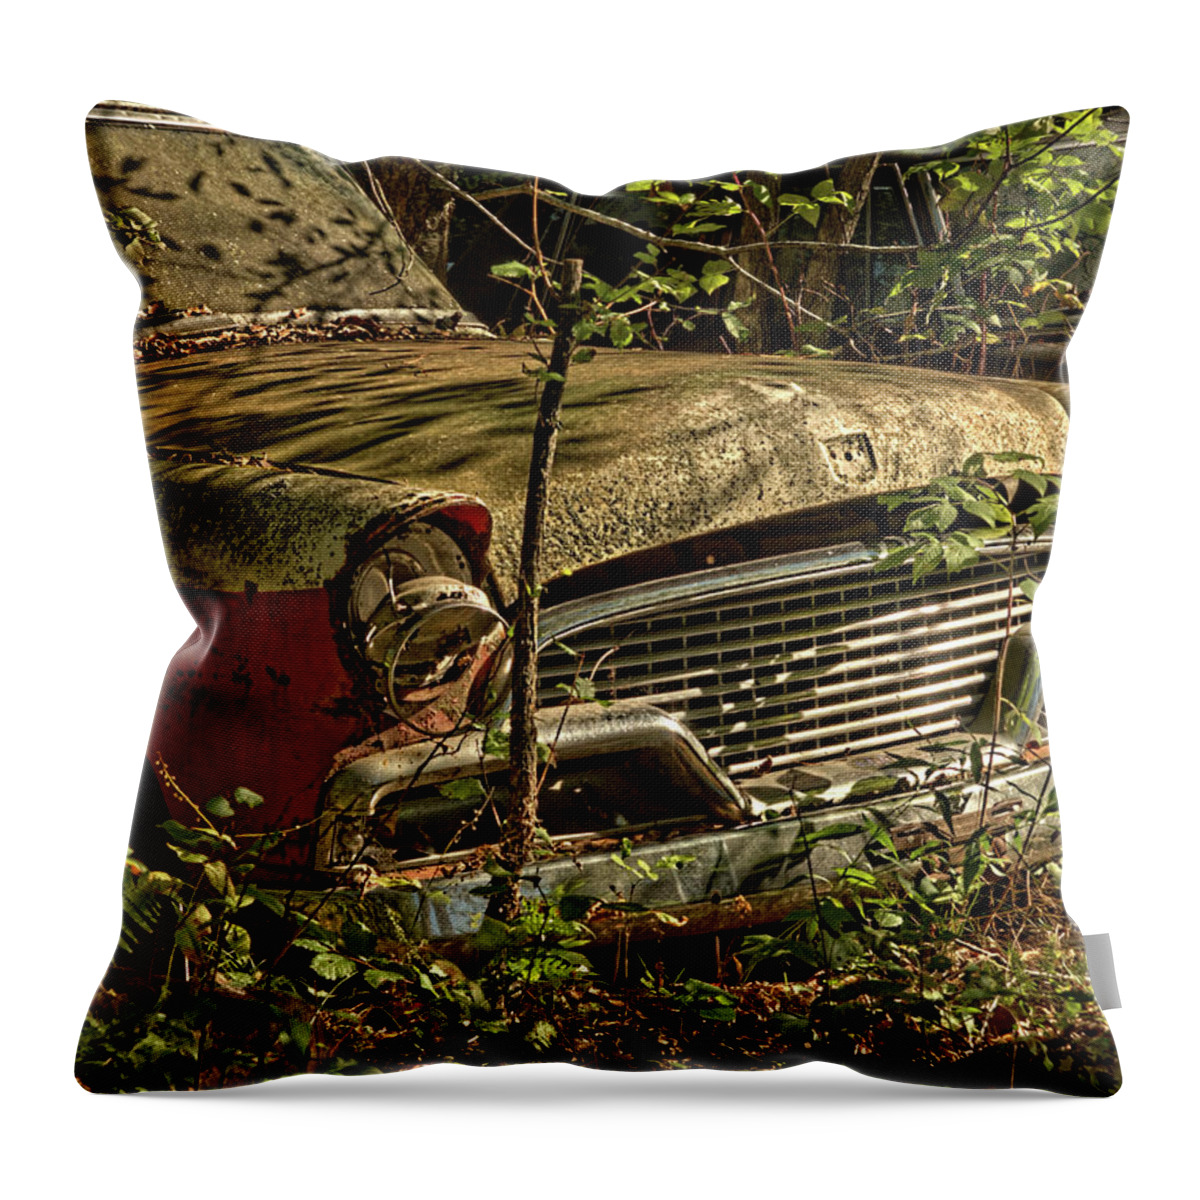 Studebaker Throw Pillow featuring the photograph Studebaker #27 by James Clinich